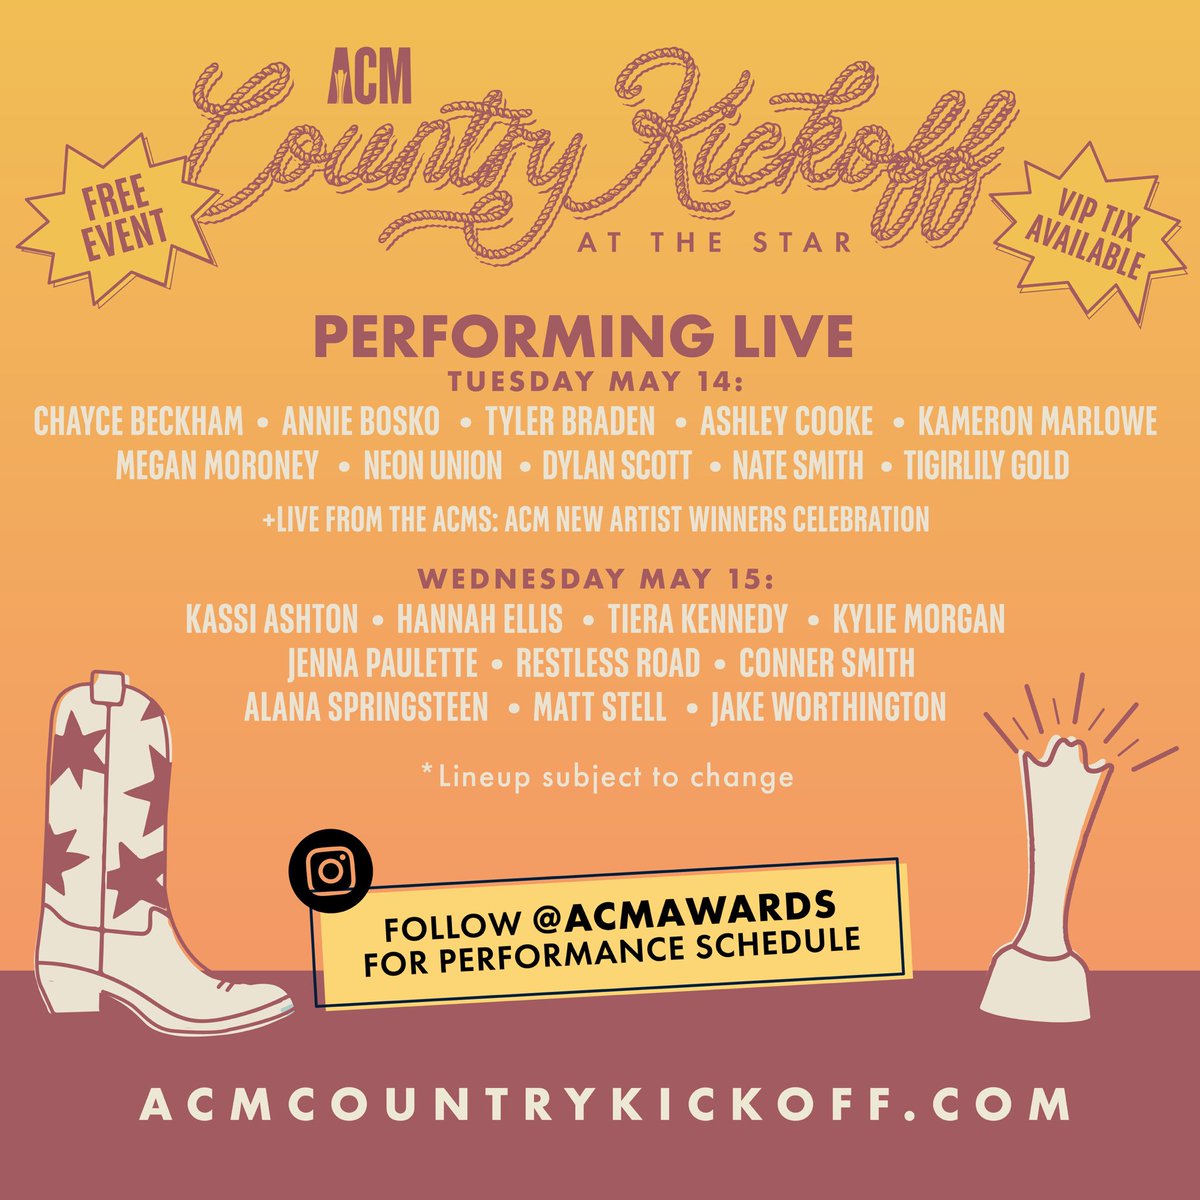 We are shuttin' it down in Frisco, Texas next week! So pumped to be back for the @ACMawards Country Kickoff at The Star in Frisco to get ACM Awards Week started! It's a FREE event, full of live music, food, and more, so I hope to see you there! VIP tickets are on sale here: